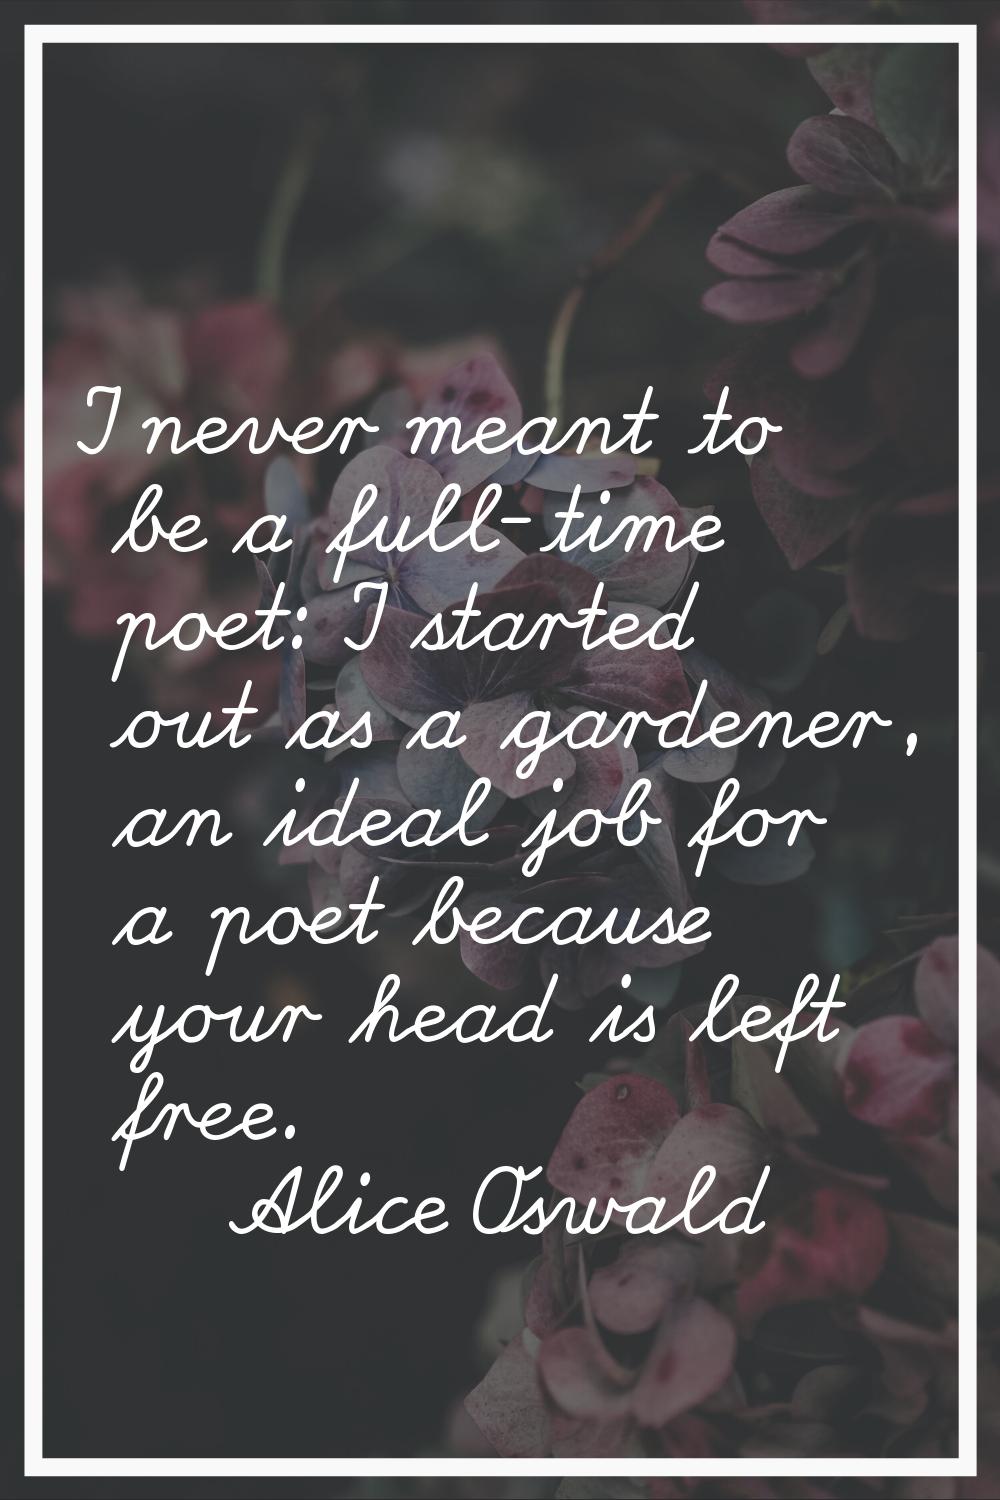 I never meant to be a full-time poet: I started out as a gardener, an ideal job for a poet because 